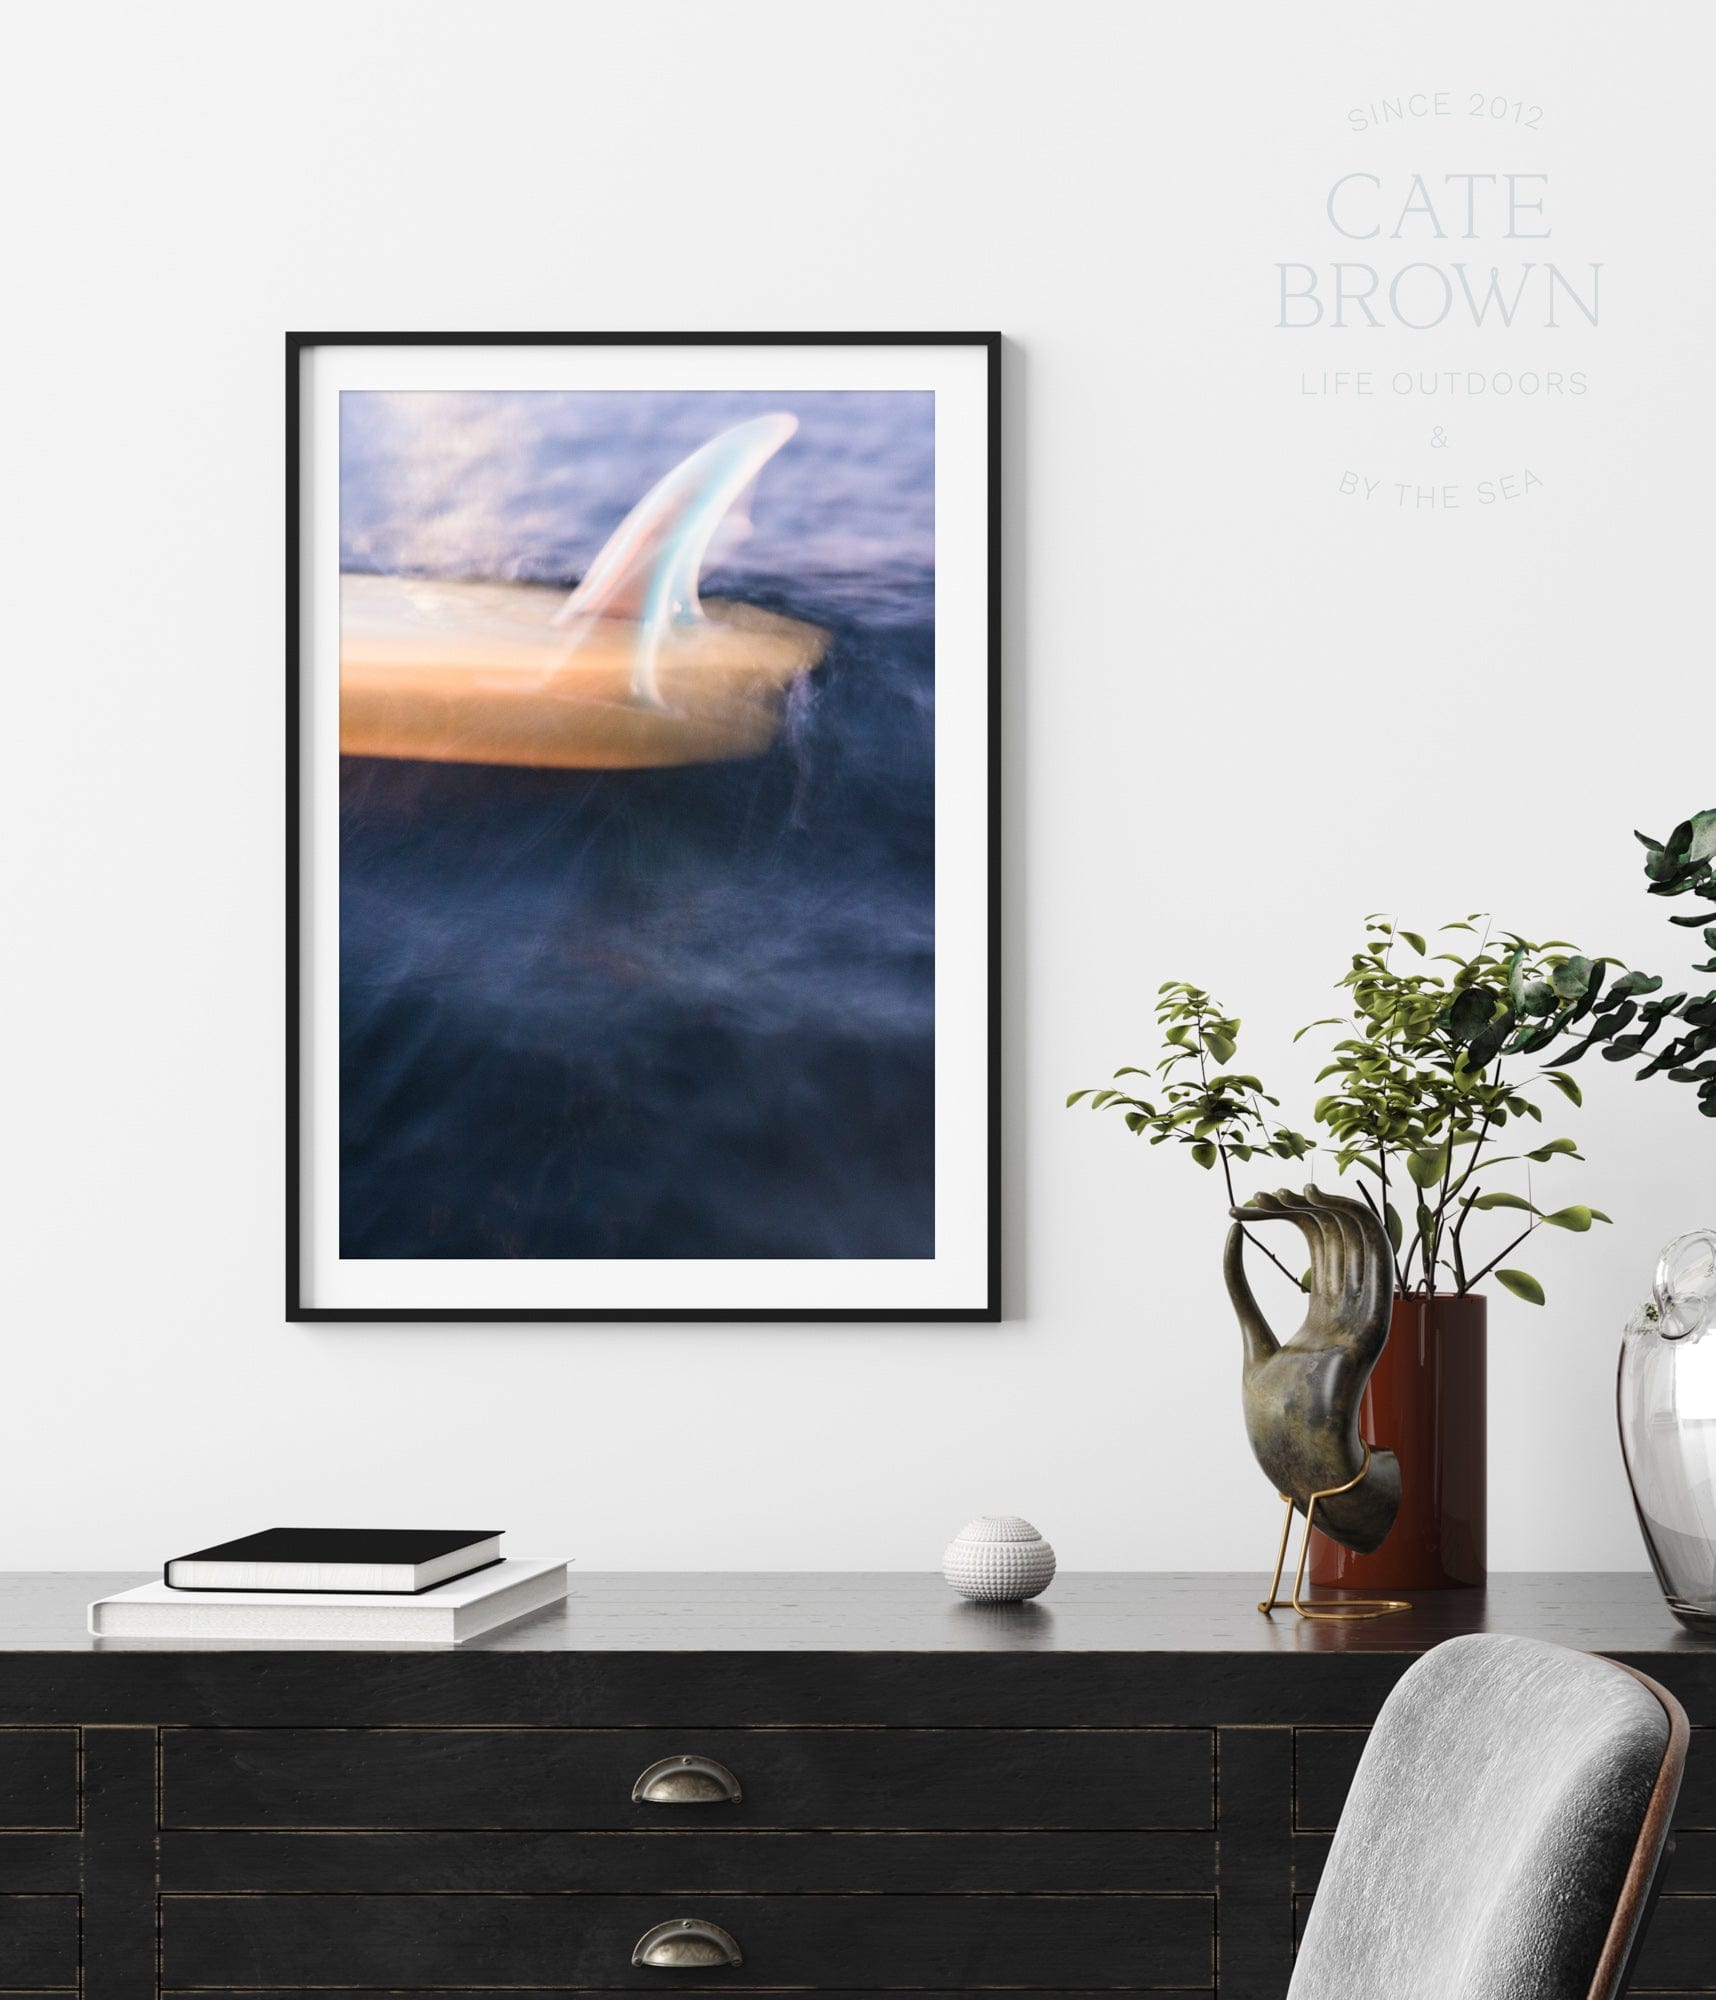 Cate Brown Photo Fine Art Print / 8"x12" / Black Single Fins  //  Surf Photography Made to Order Ocean Fine Art